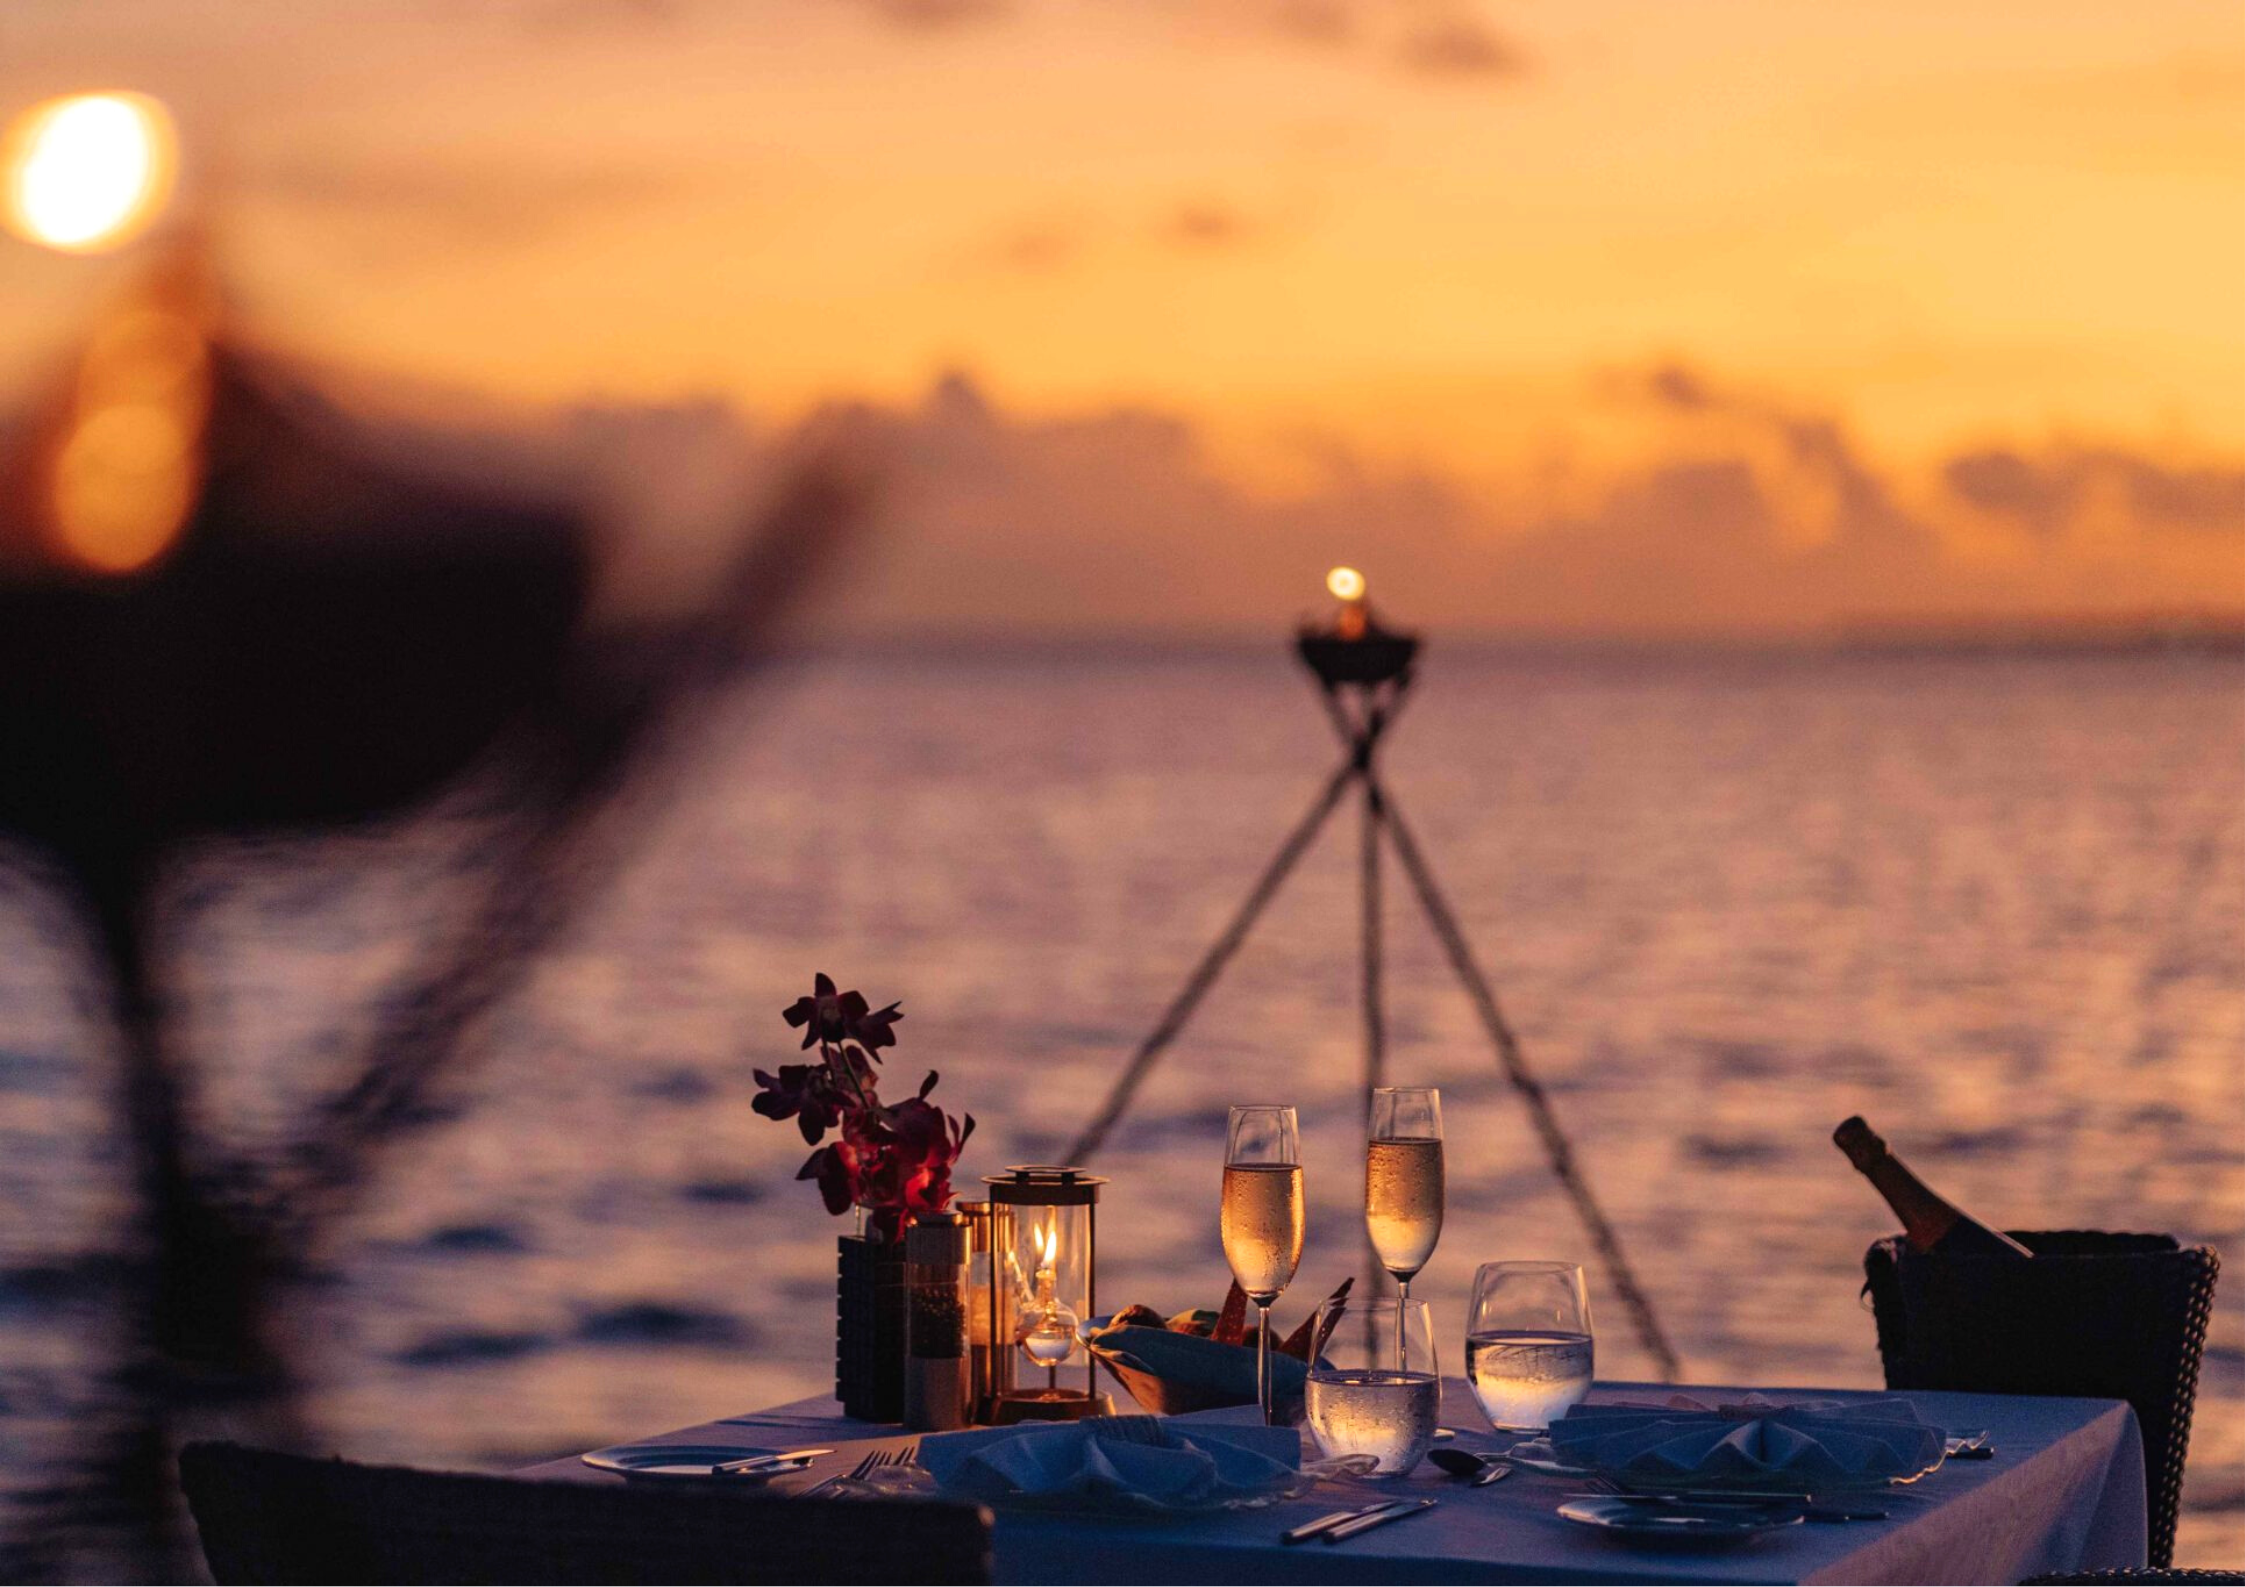 EXPERIENCE ROMANCE AT BAROS THIS VALENTINE'S!